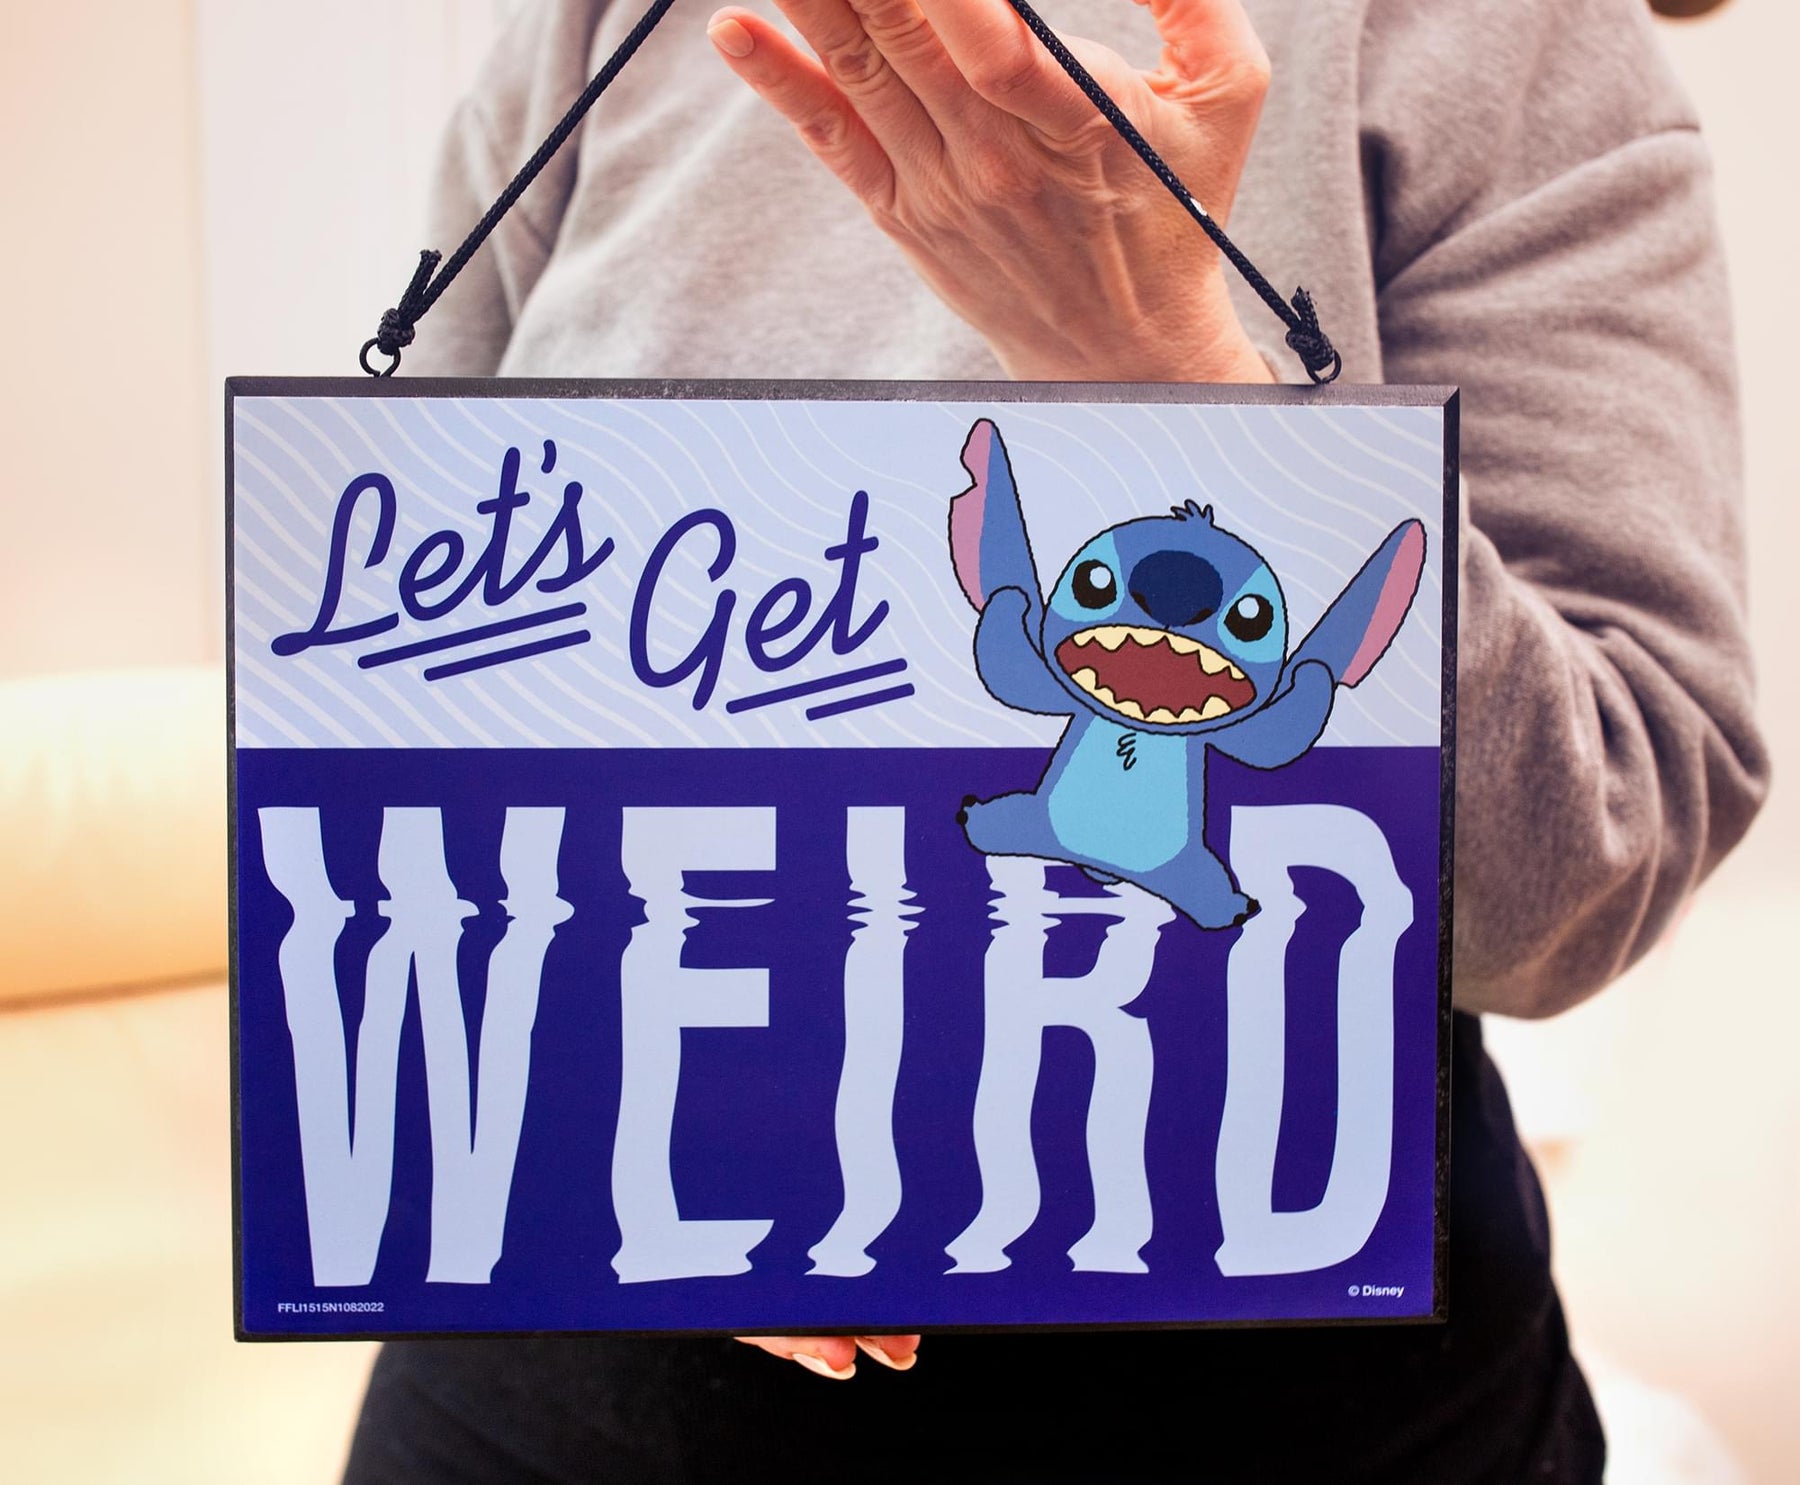 Disney Lilo & Stitch "Let's Get Weird" Reversible Hanging Sign Wall Art